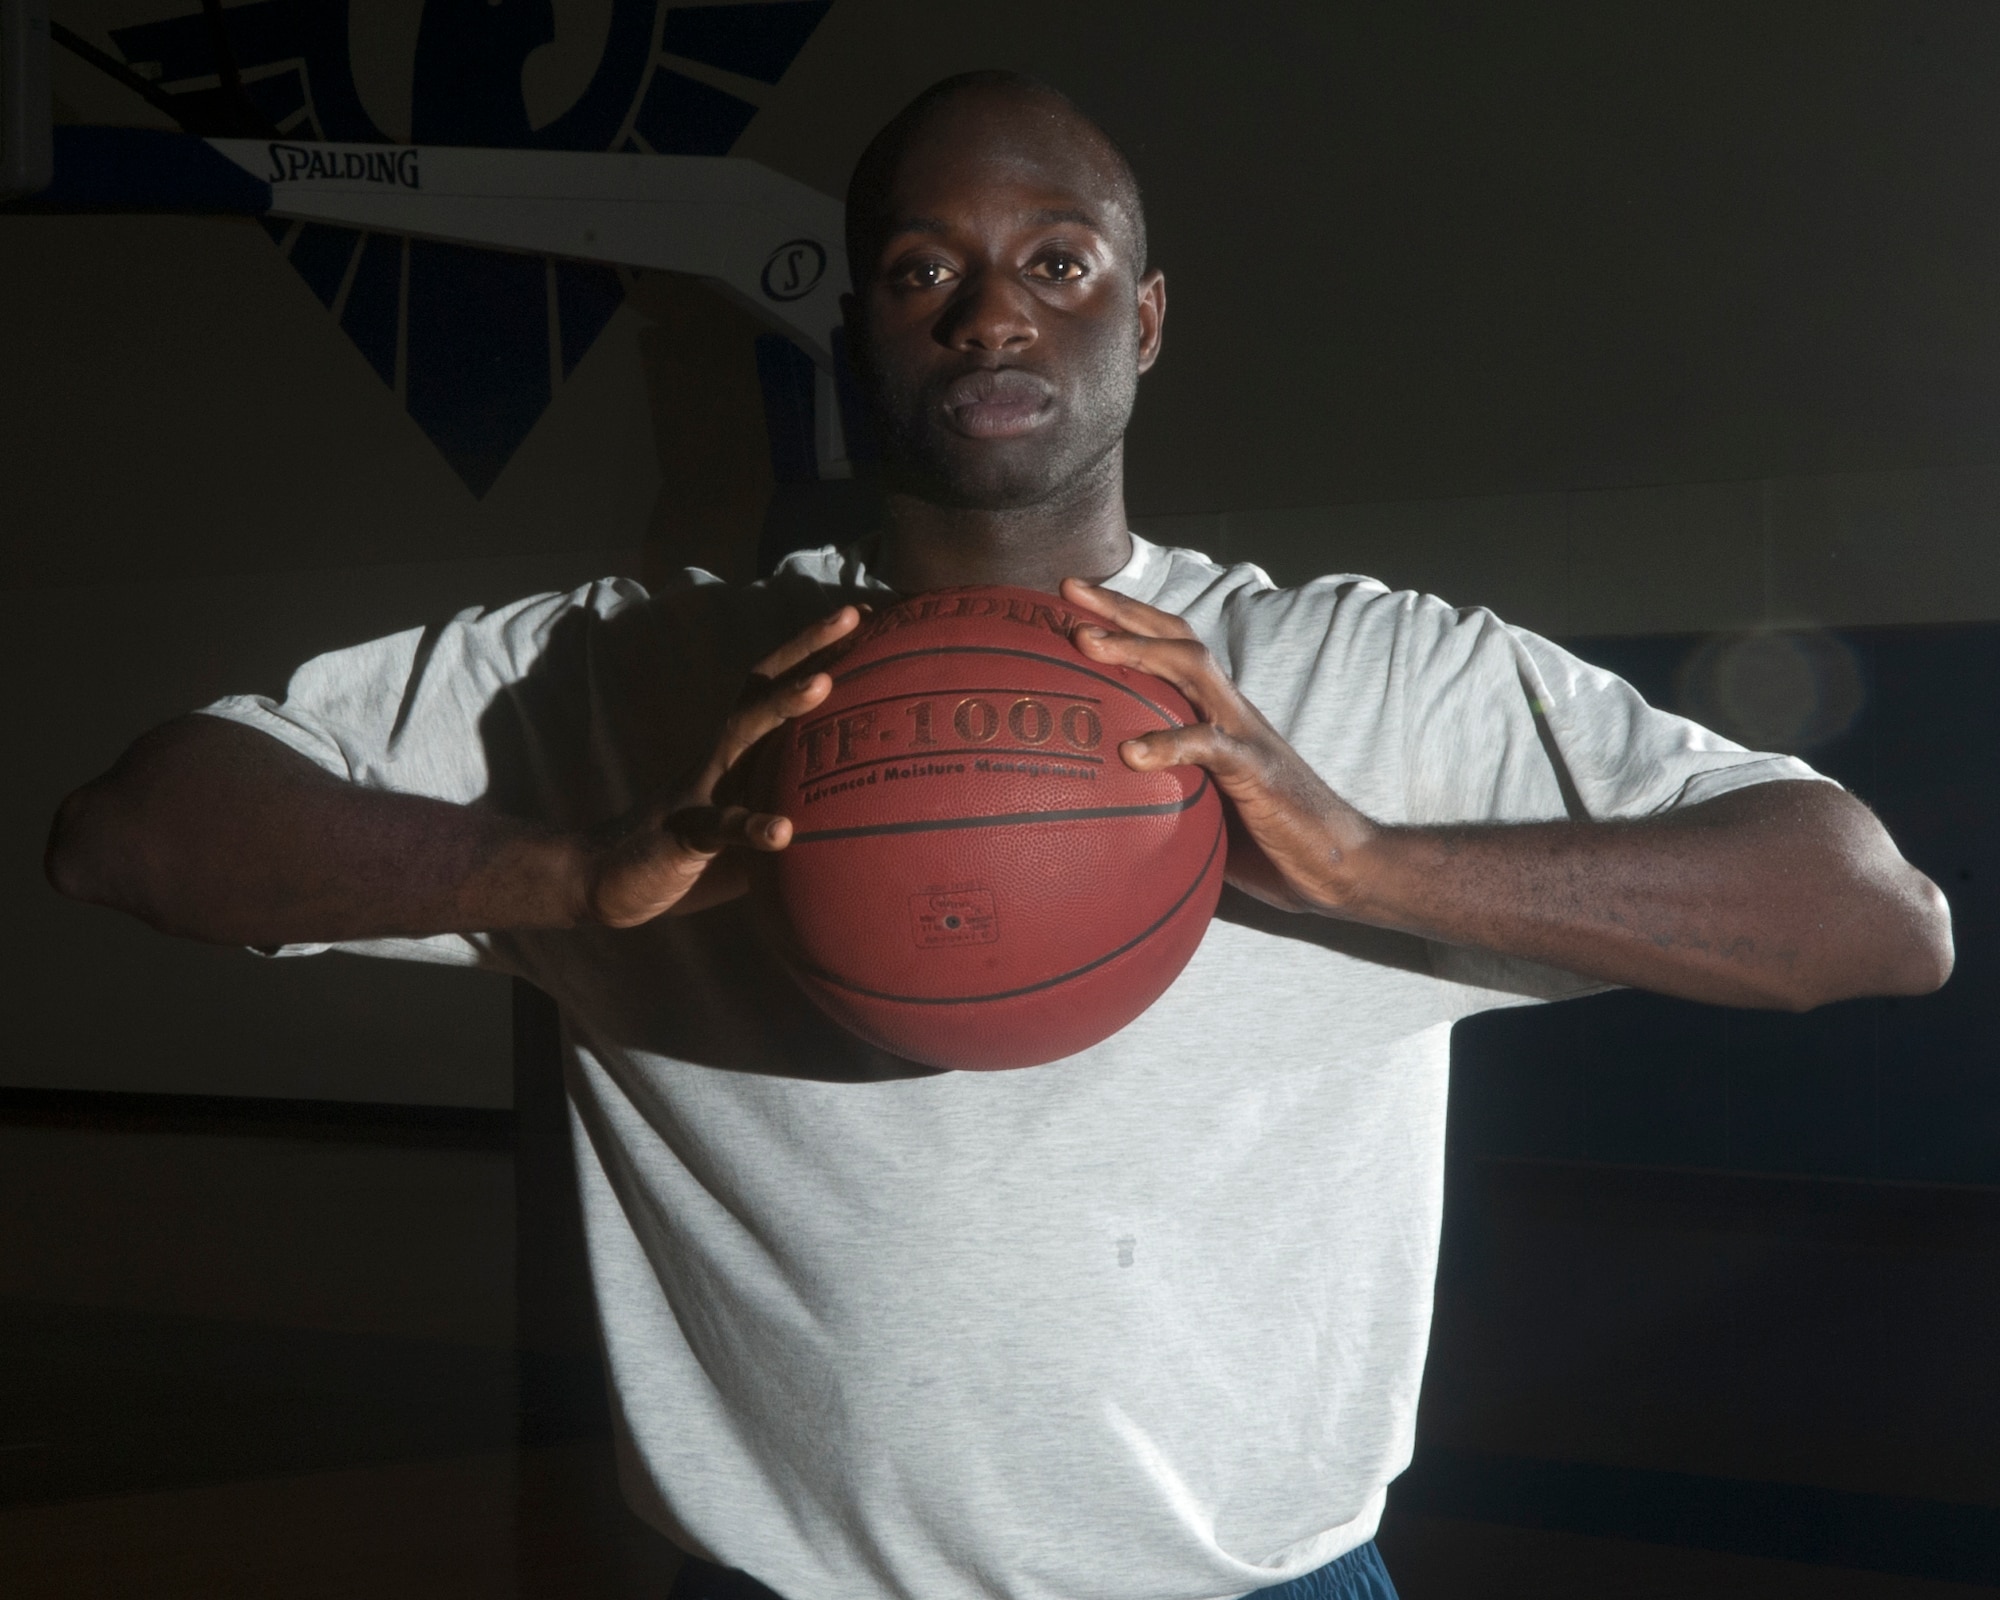 Staff Sgt. Artis Gandy, Air Force Life Cycle Management Center administrator, will be one of 24 prospects vying for an All-Air Force Men's Basketball Team roster spot during training camp starting Oct. 18 at Joint Base San Antonio-Lackland (U.S. Air Force photo by Airman Justine Rho/released).

